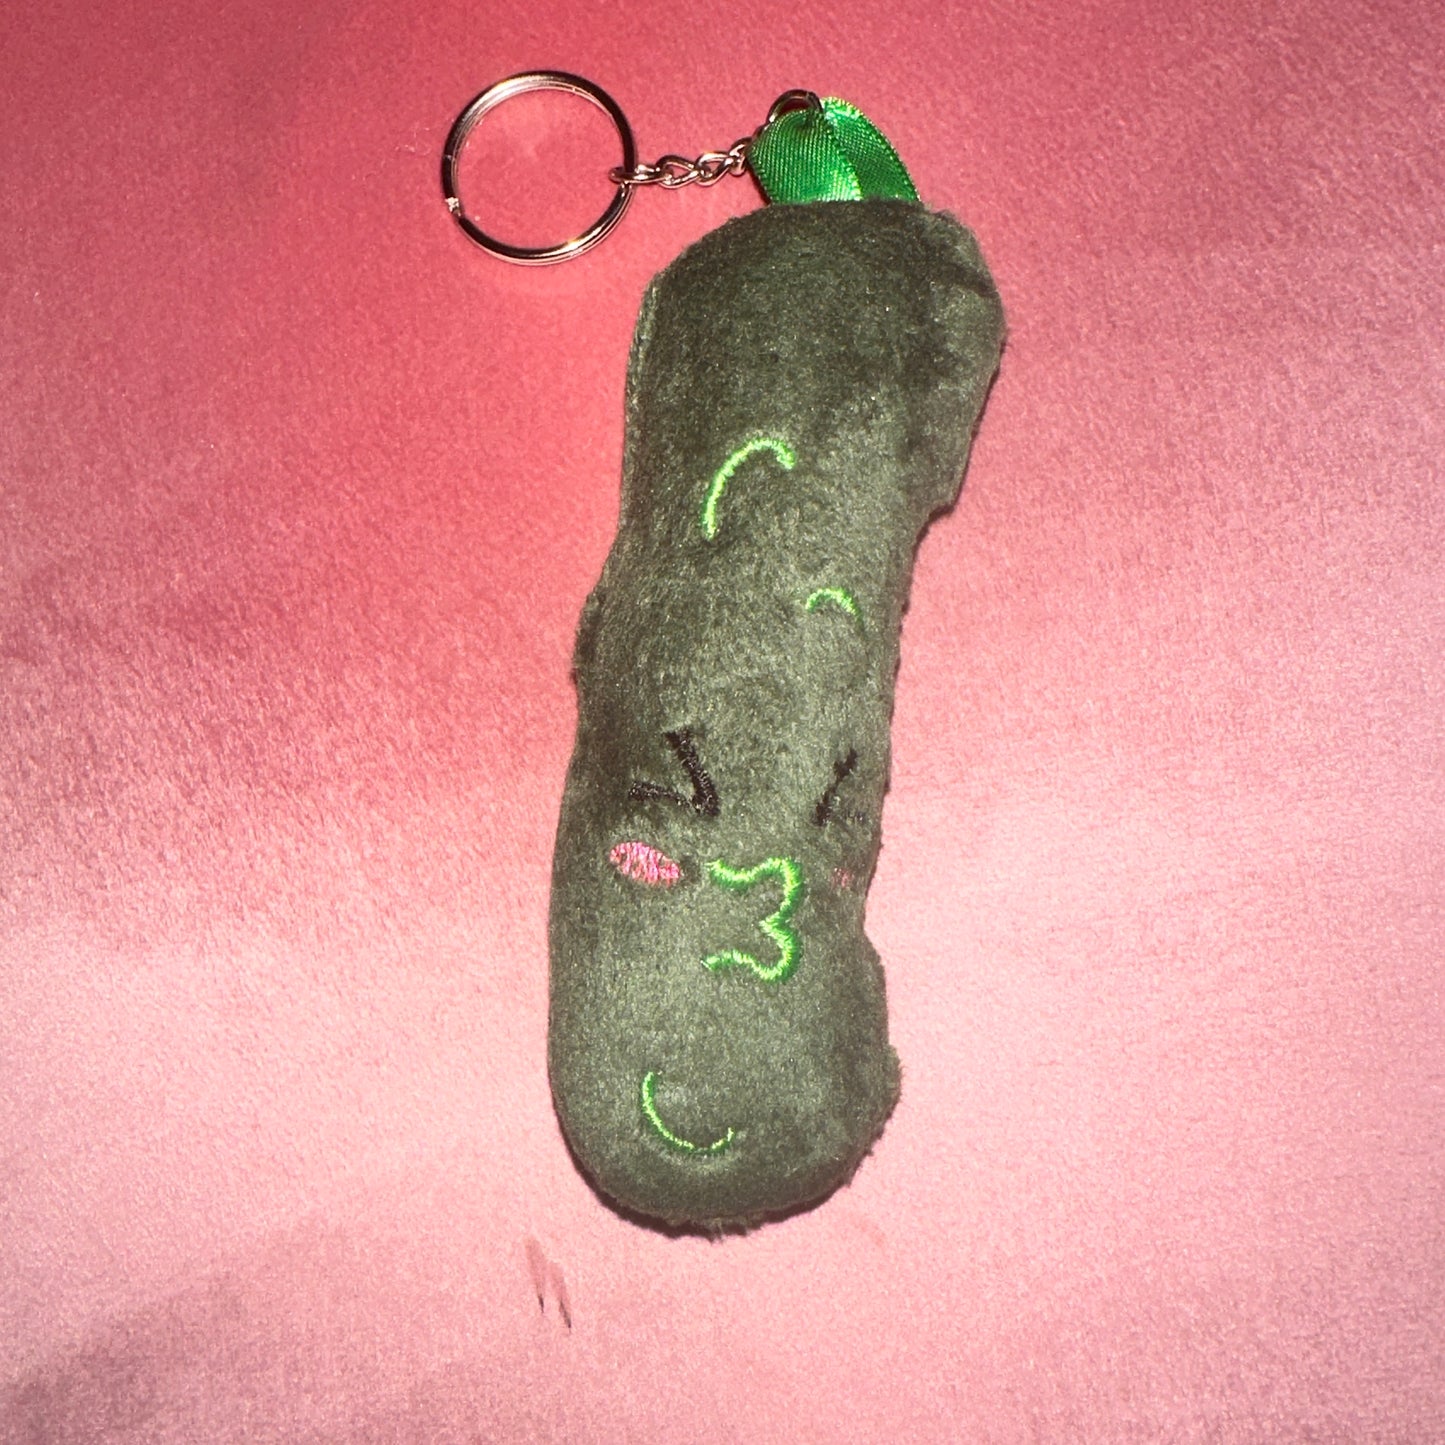 Emotional support pickle keychain